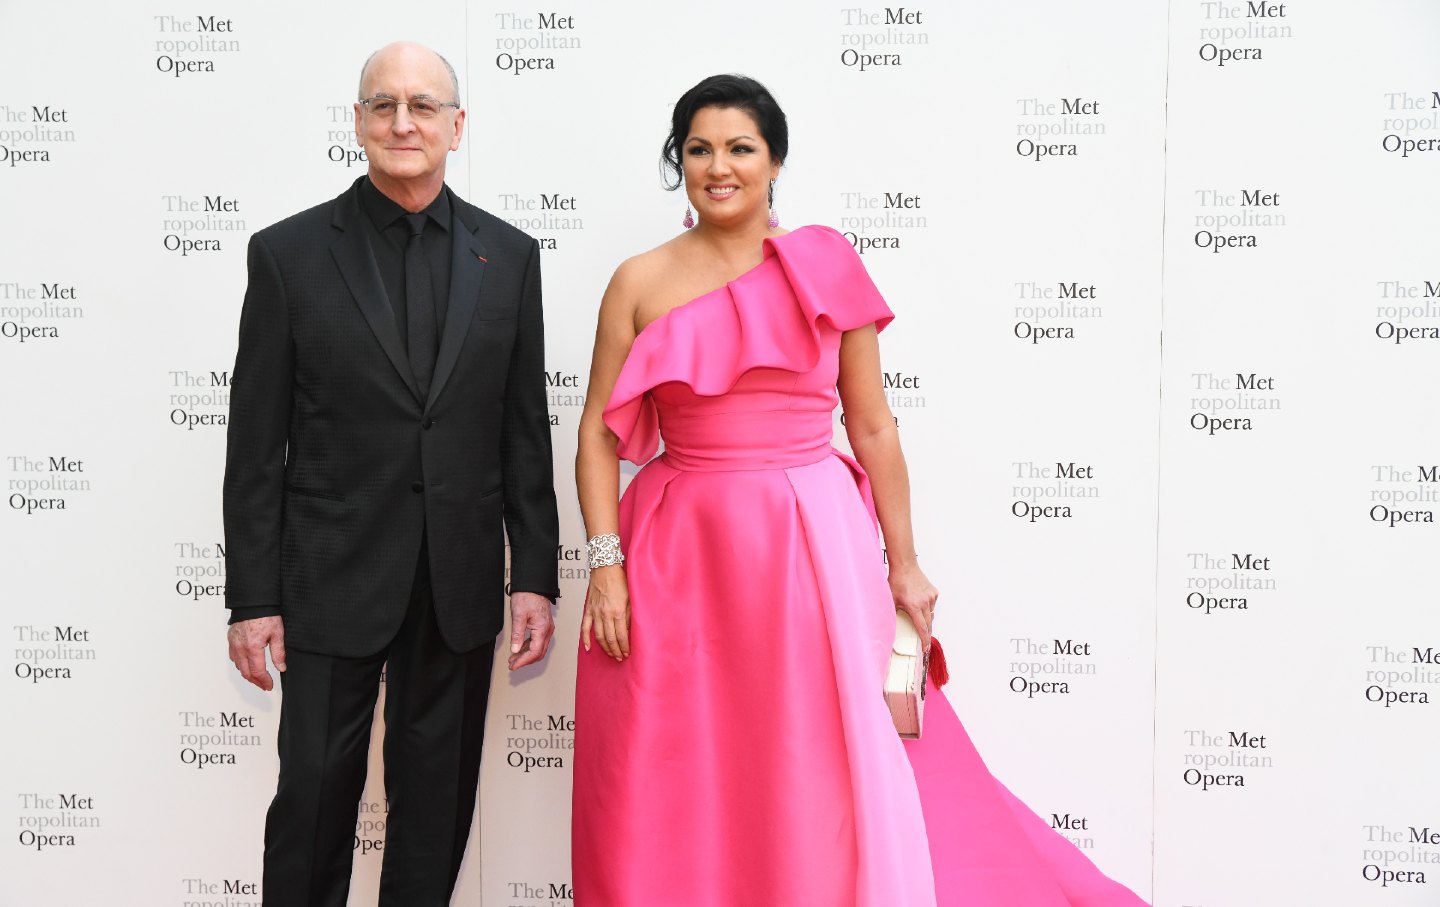 Peter Gelb and Anna Netrebeko on the red carpet